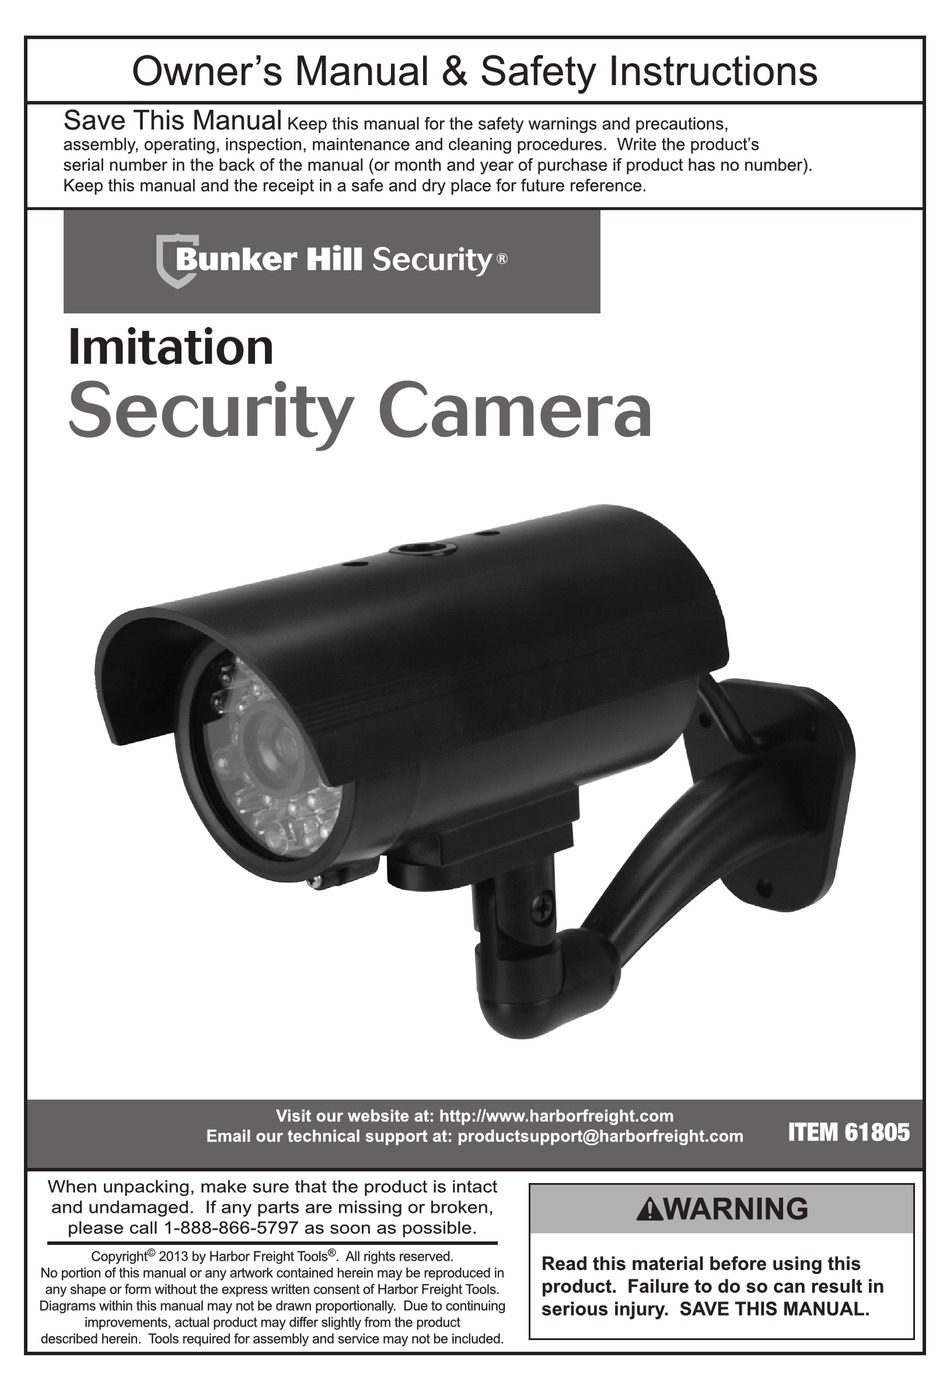 bunker hill wireless security camera monitor